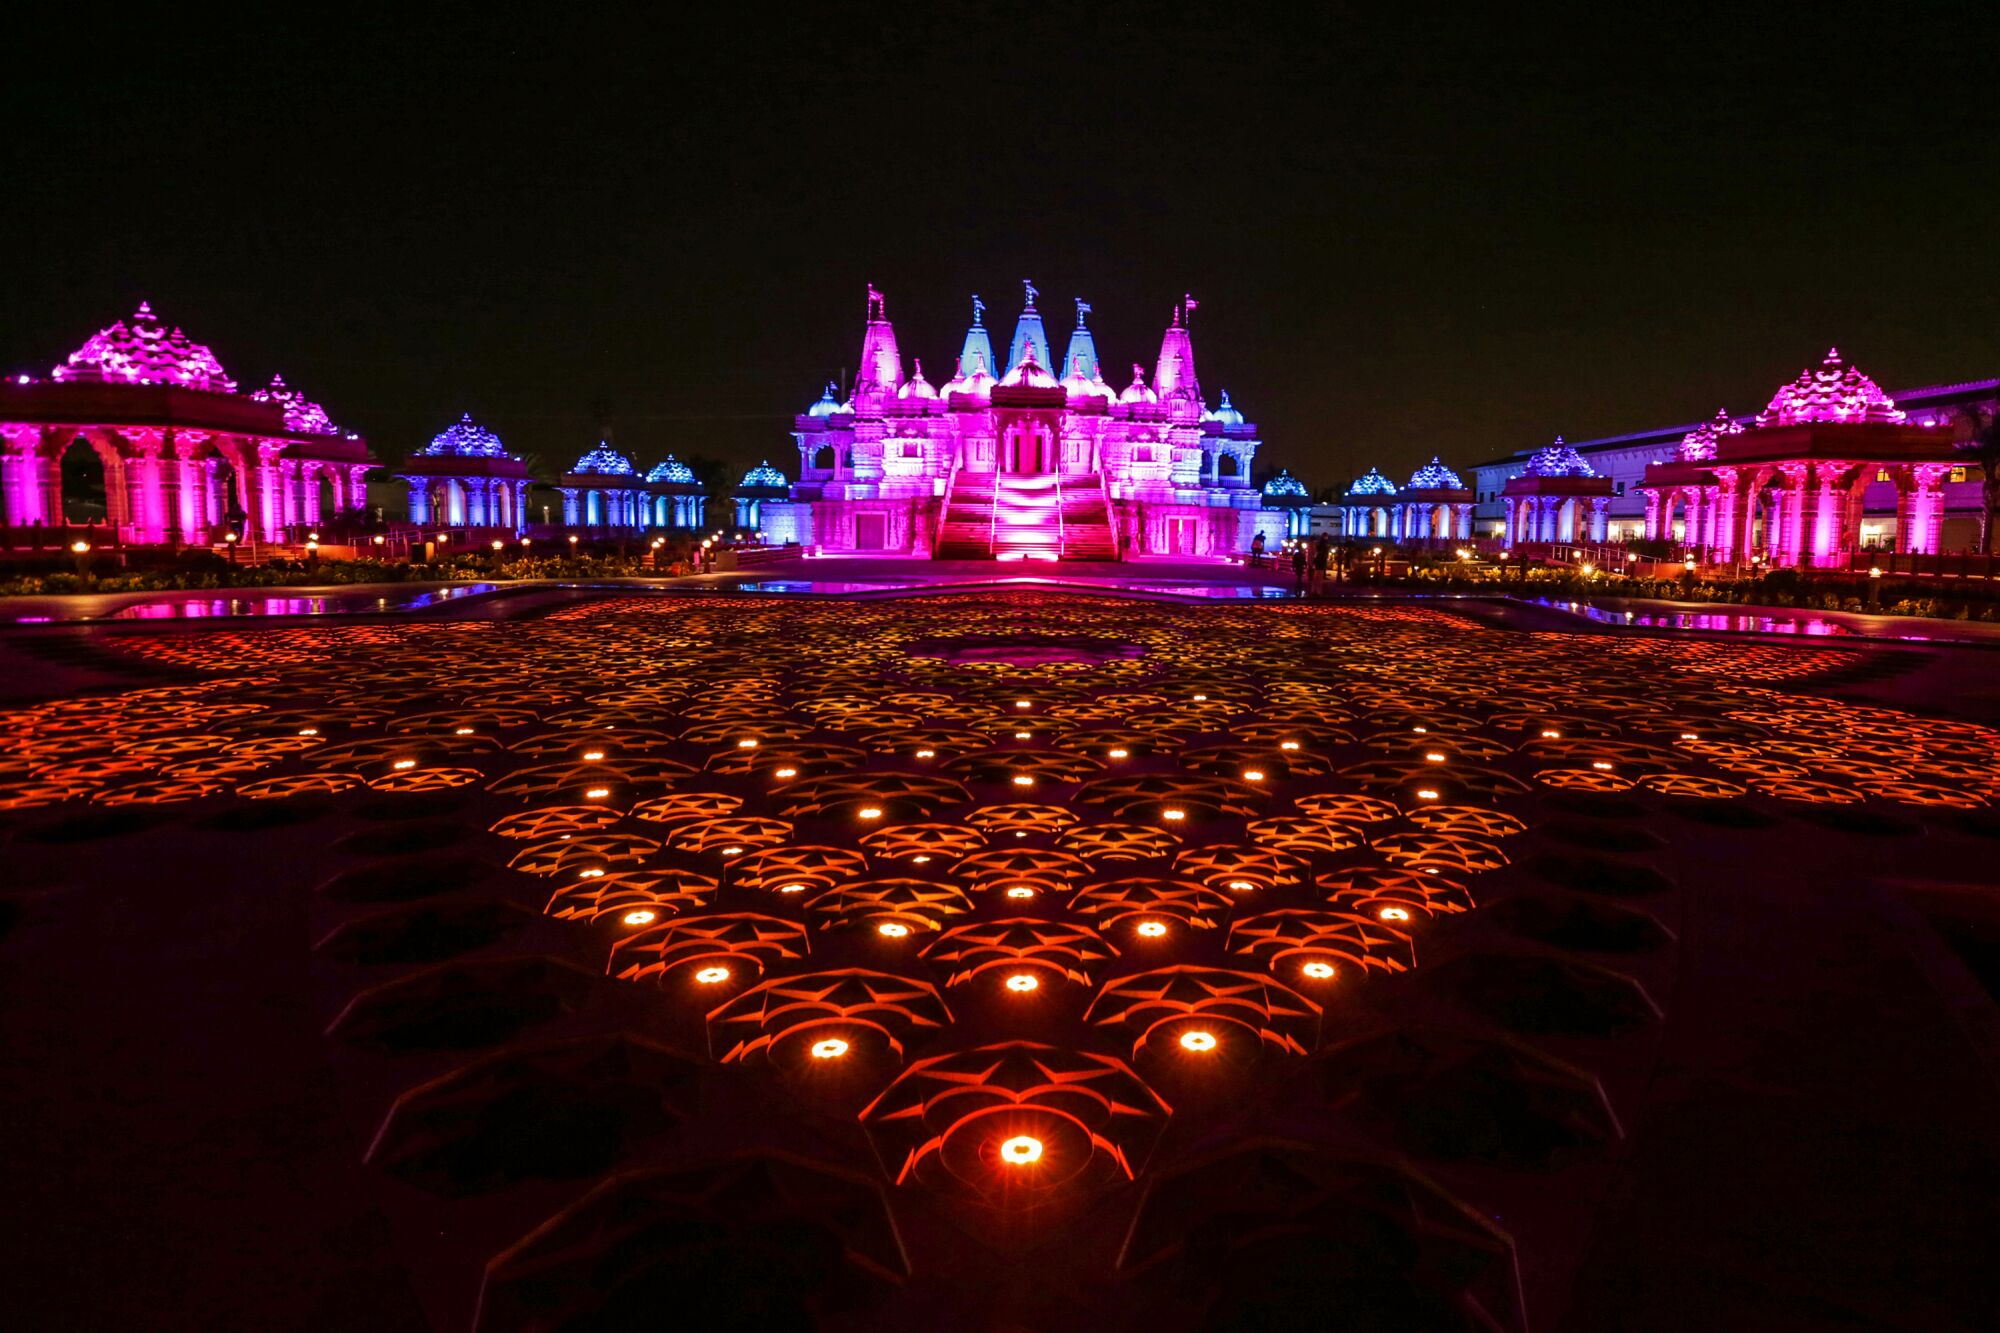 Blue, purple, and red light bathes the exterior of a large, ornate Hindu temple at night.